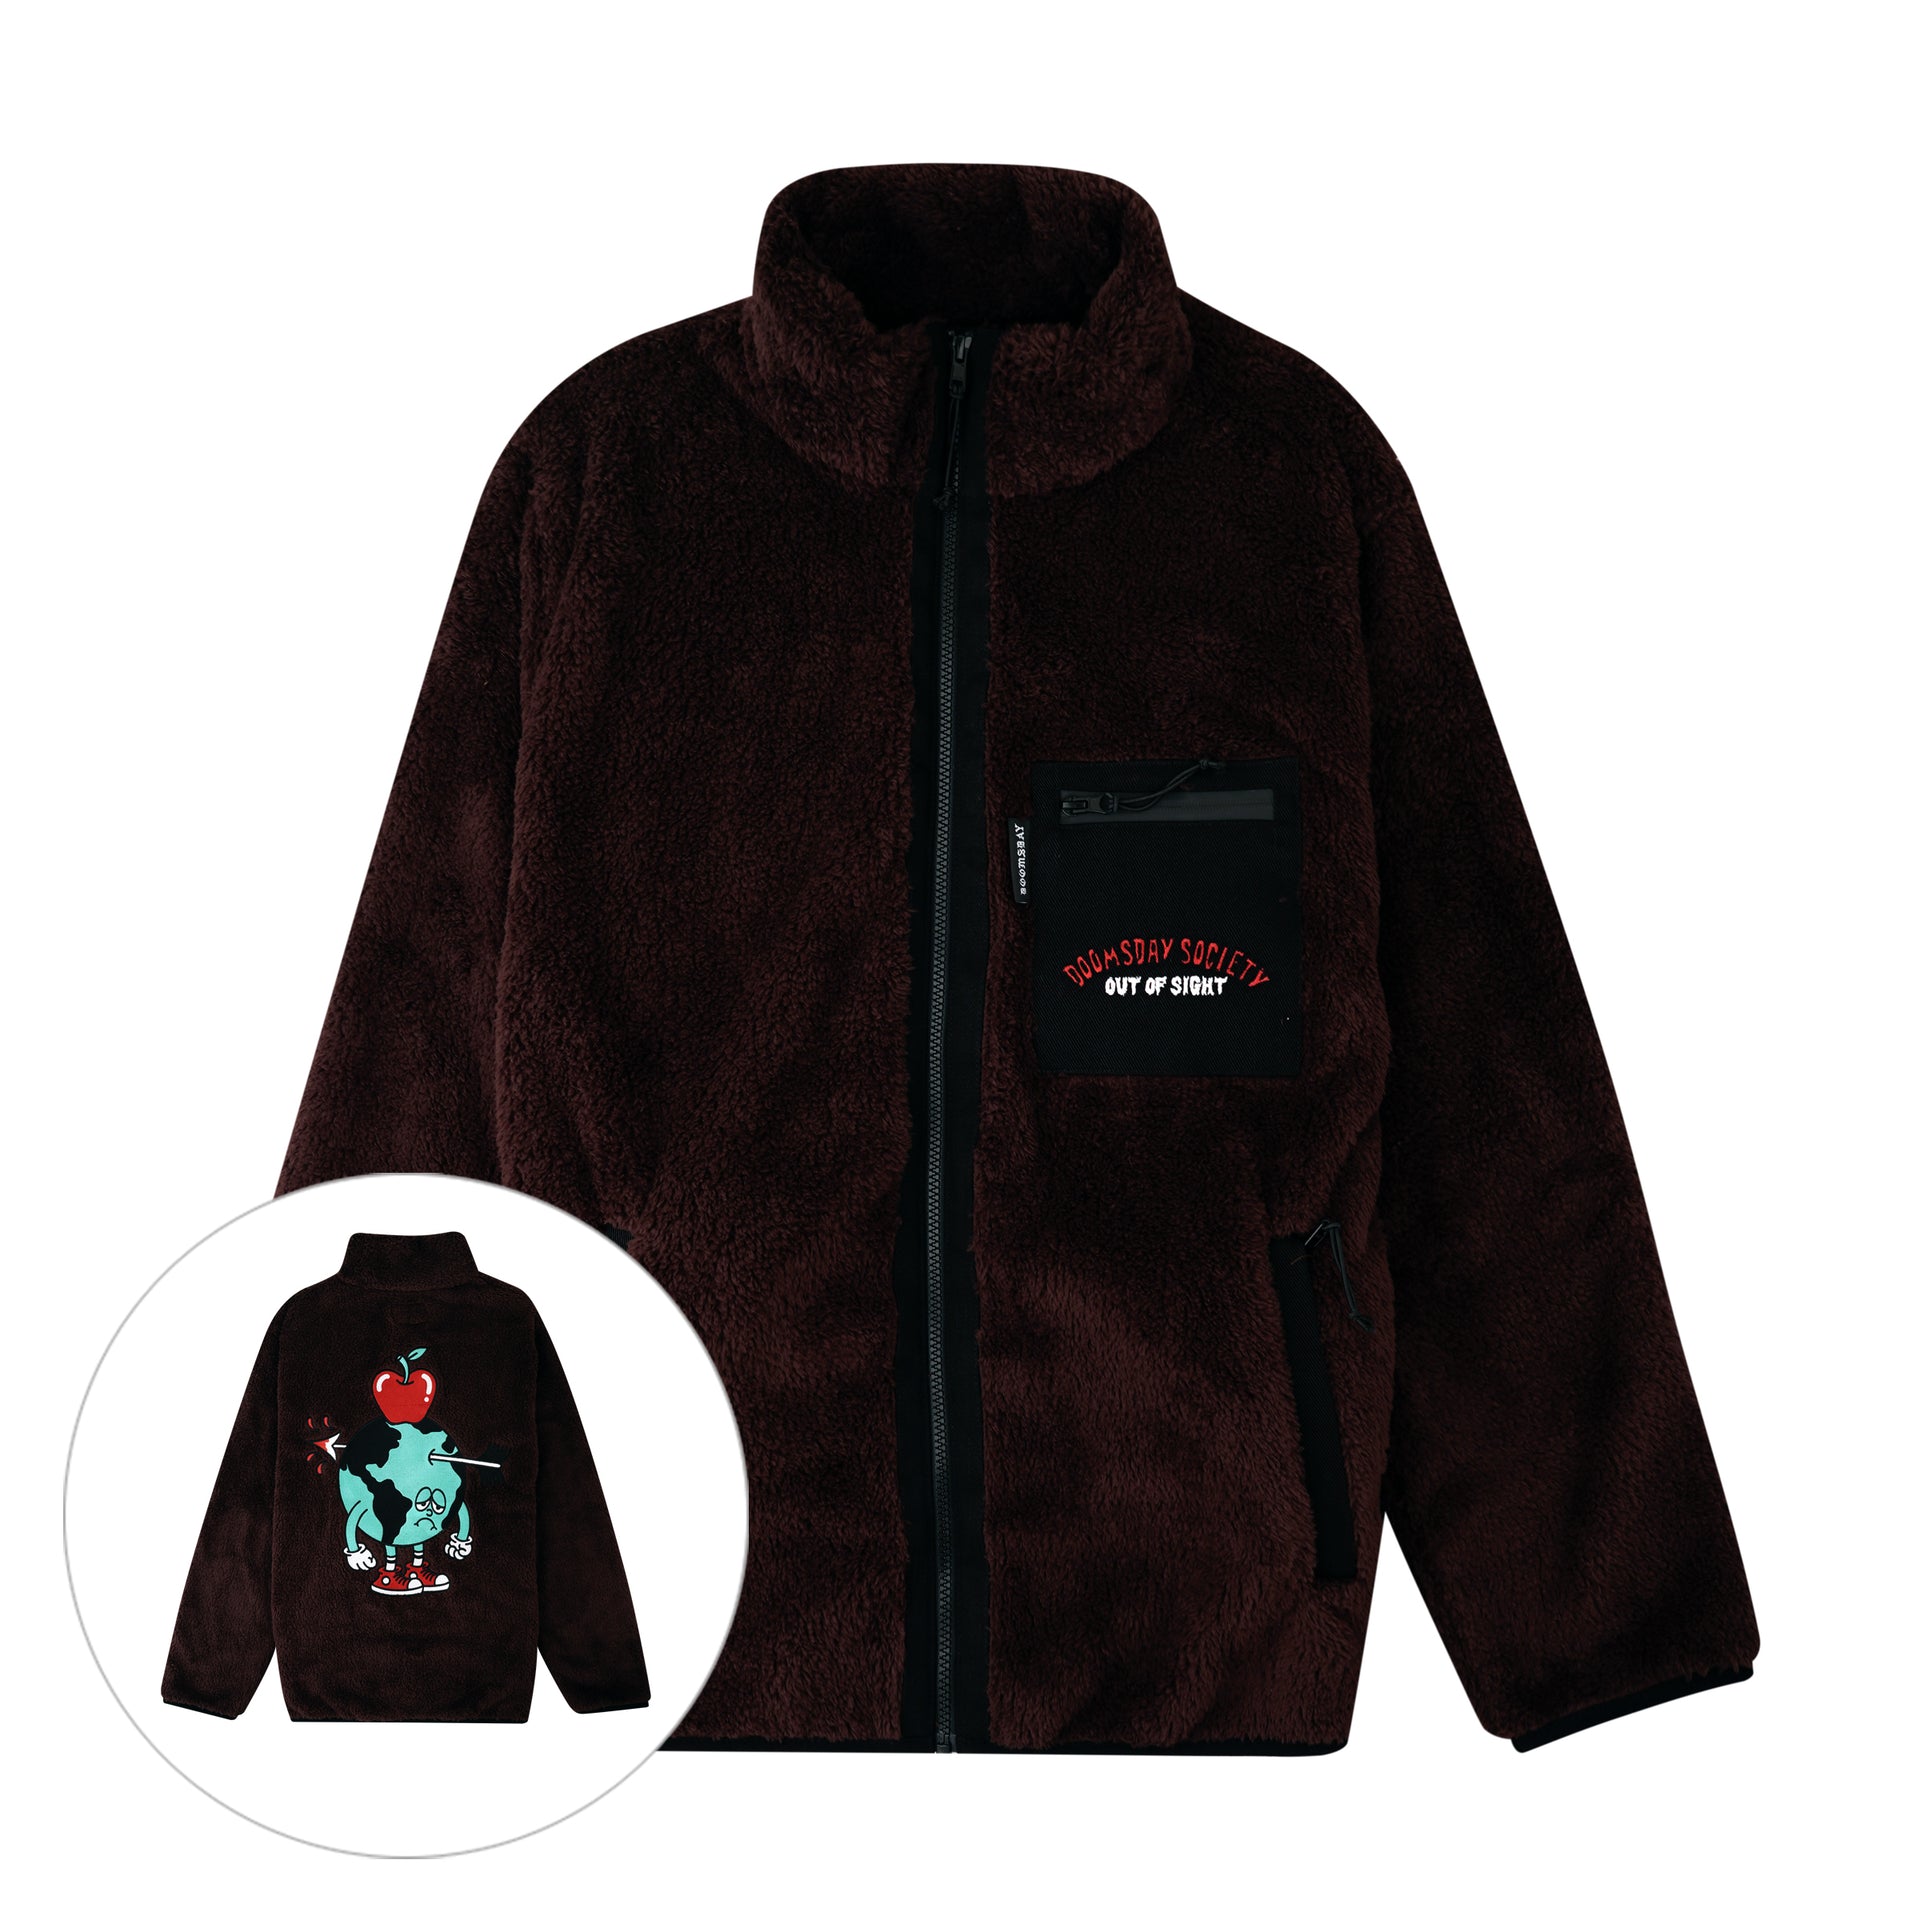 OUT OF SIGHT FLEECE JACKET